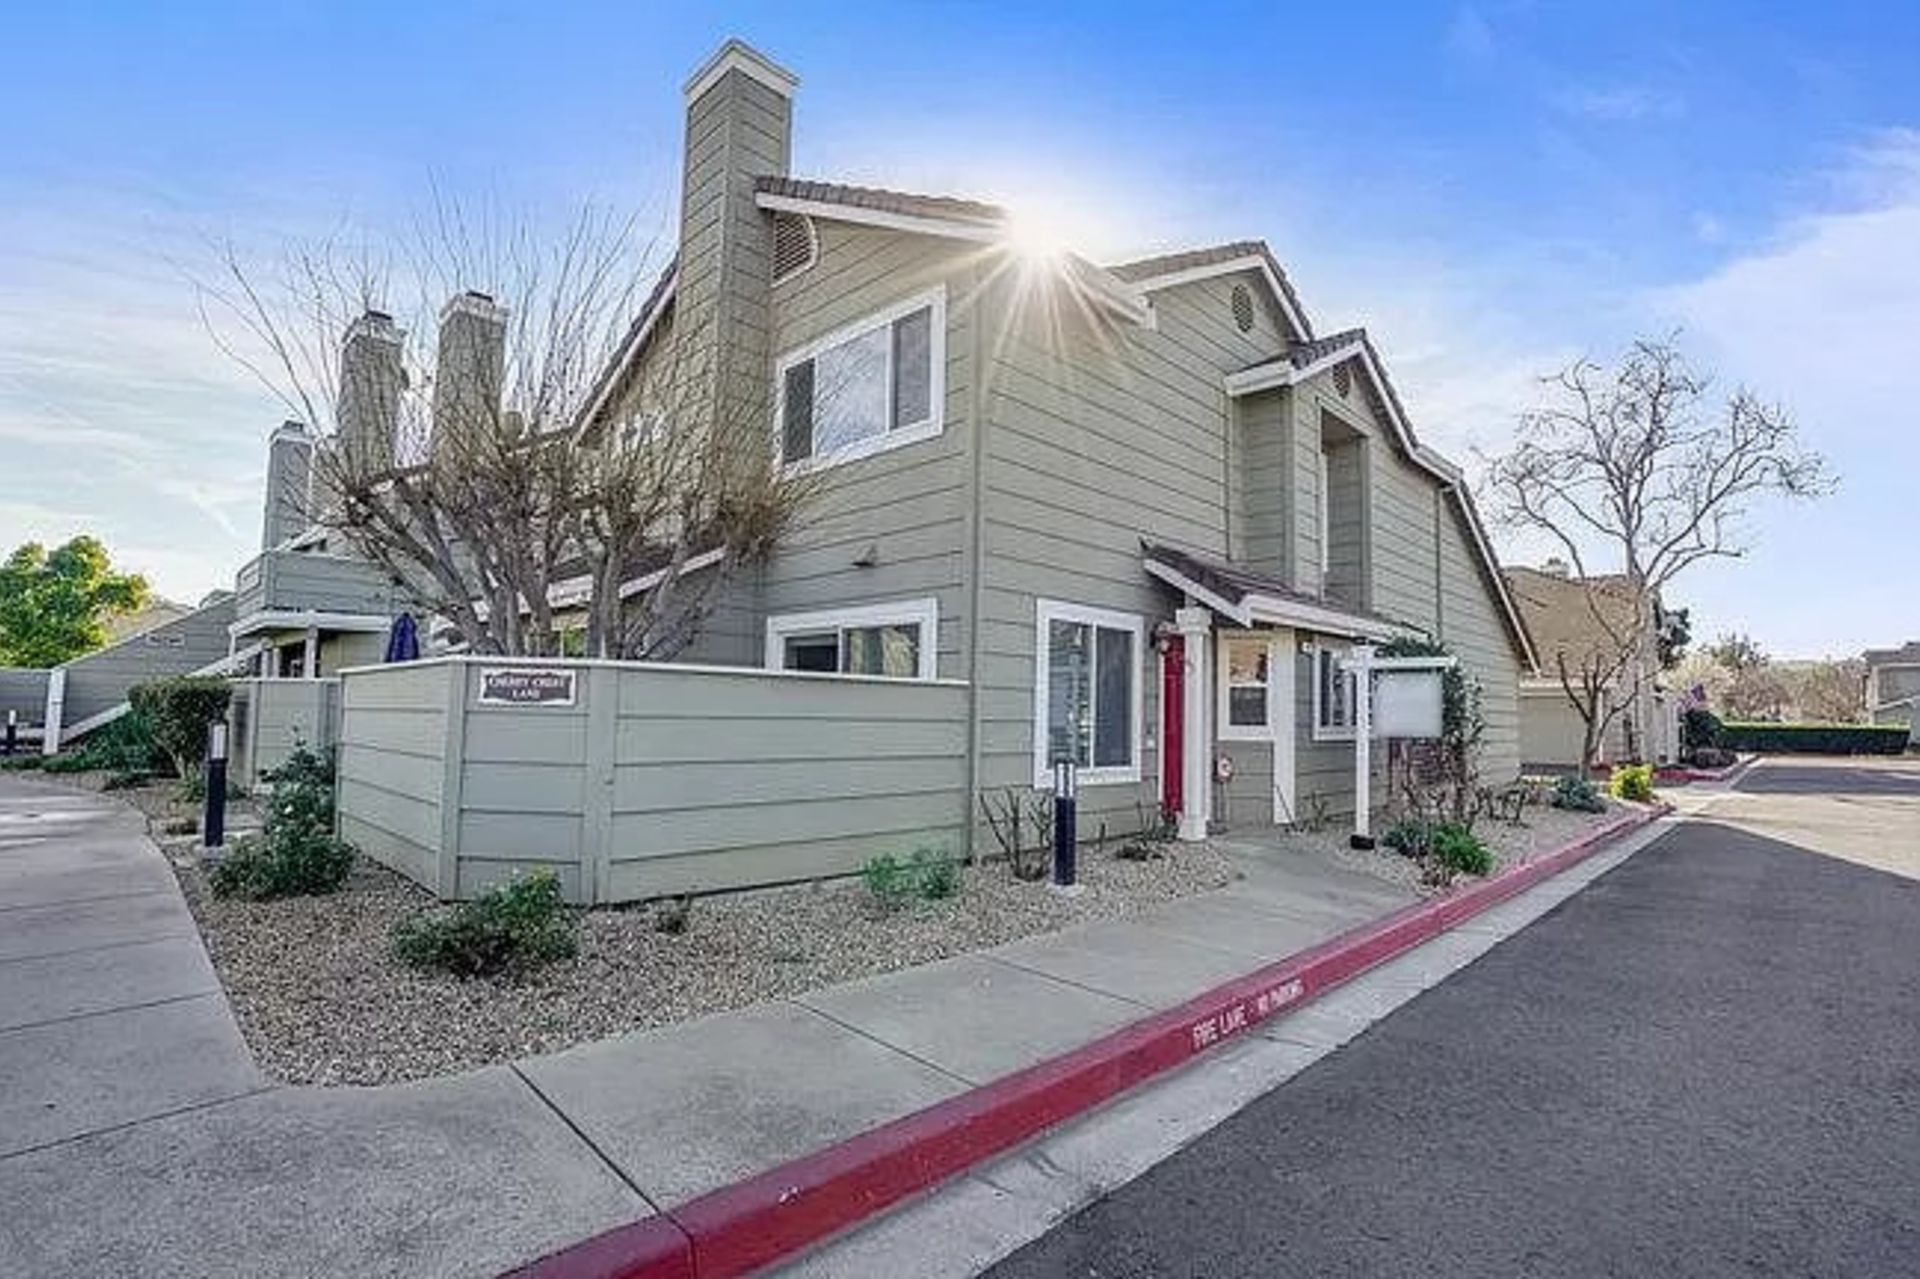 Sold for Record Breaking Price of $960,000! 45 Cherry Crest Ln, San Jose, CA